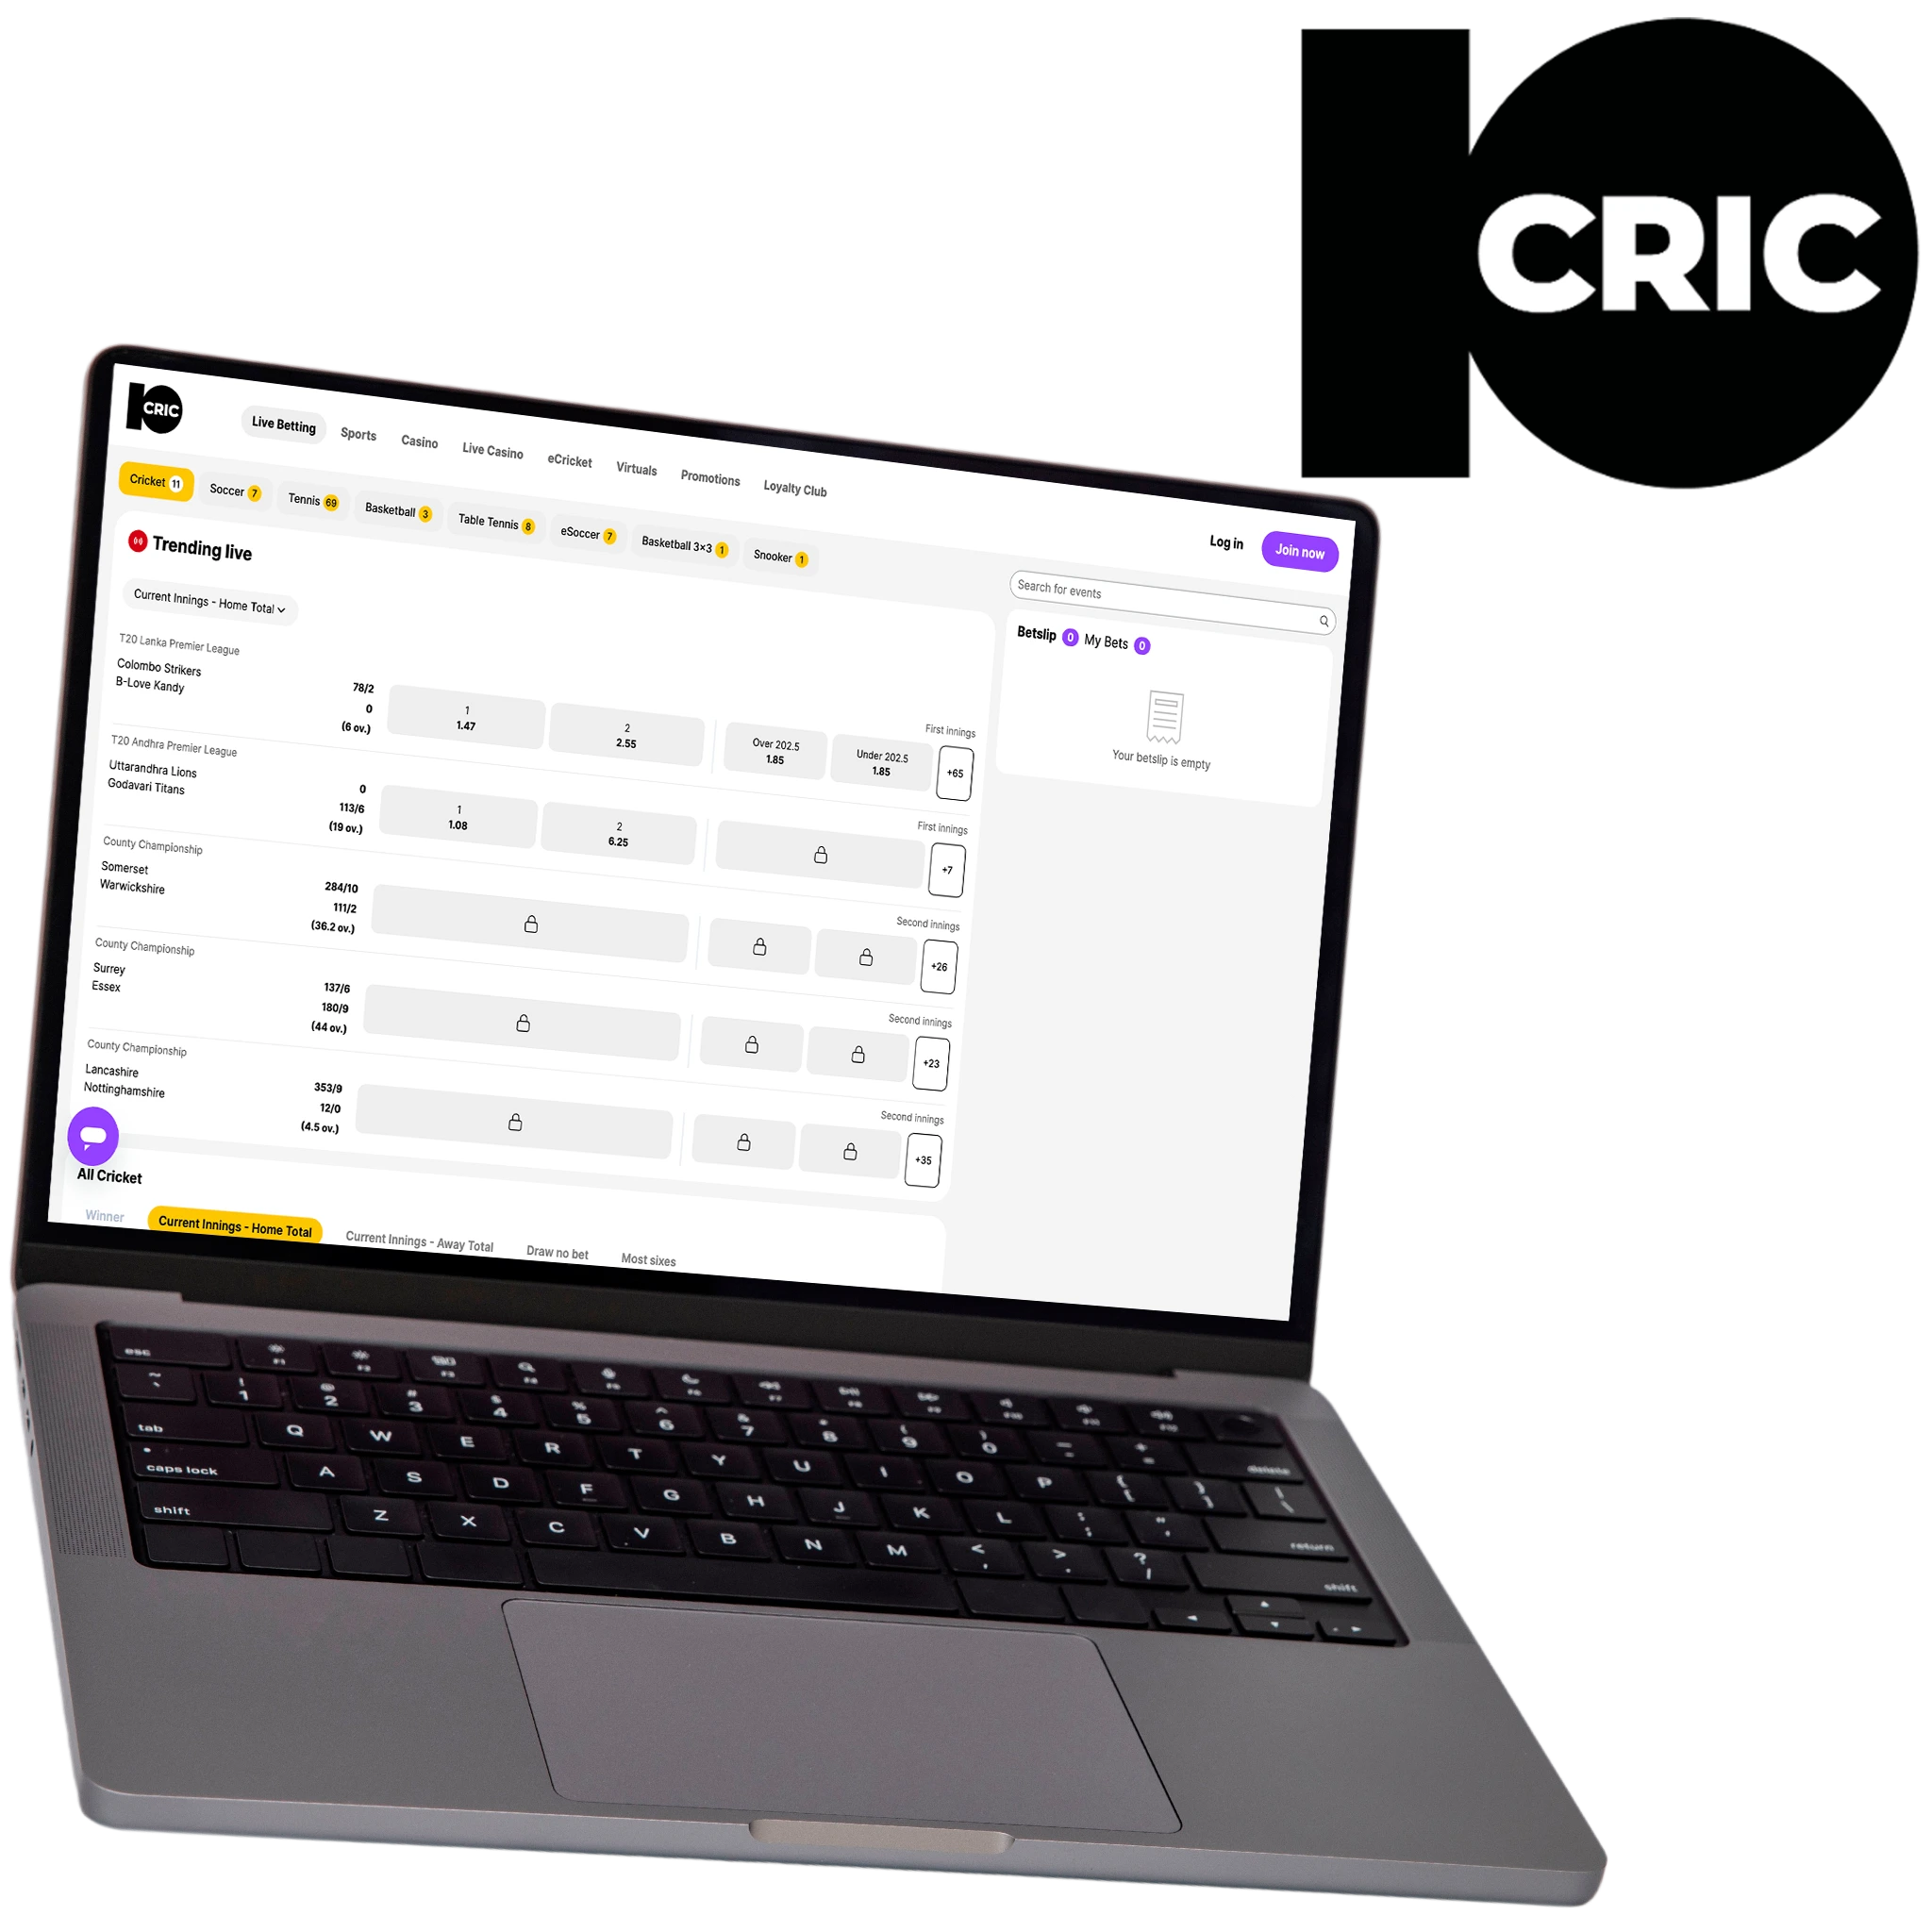 10cric the choice of thousands of Indian punters to register their live cricket bets daily.